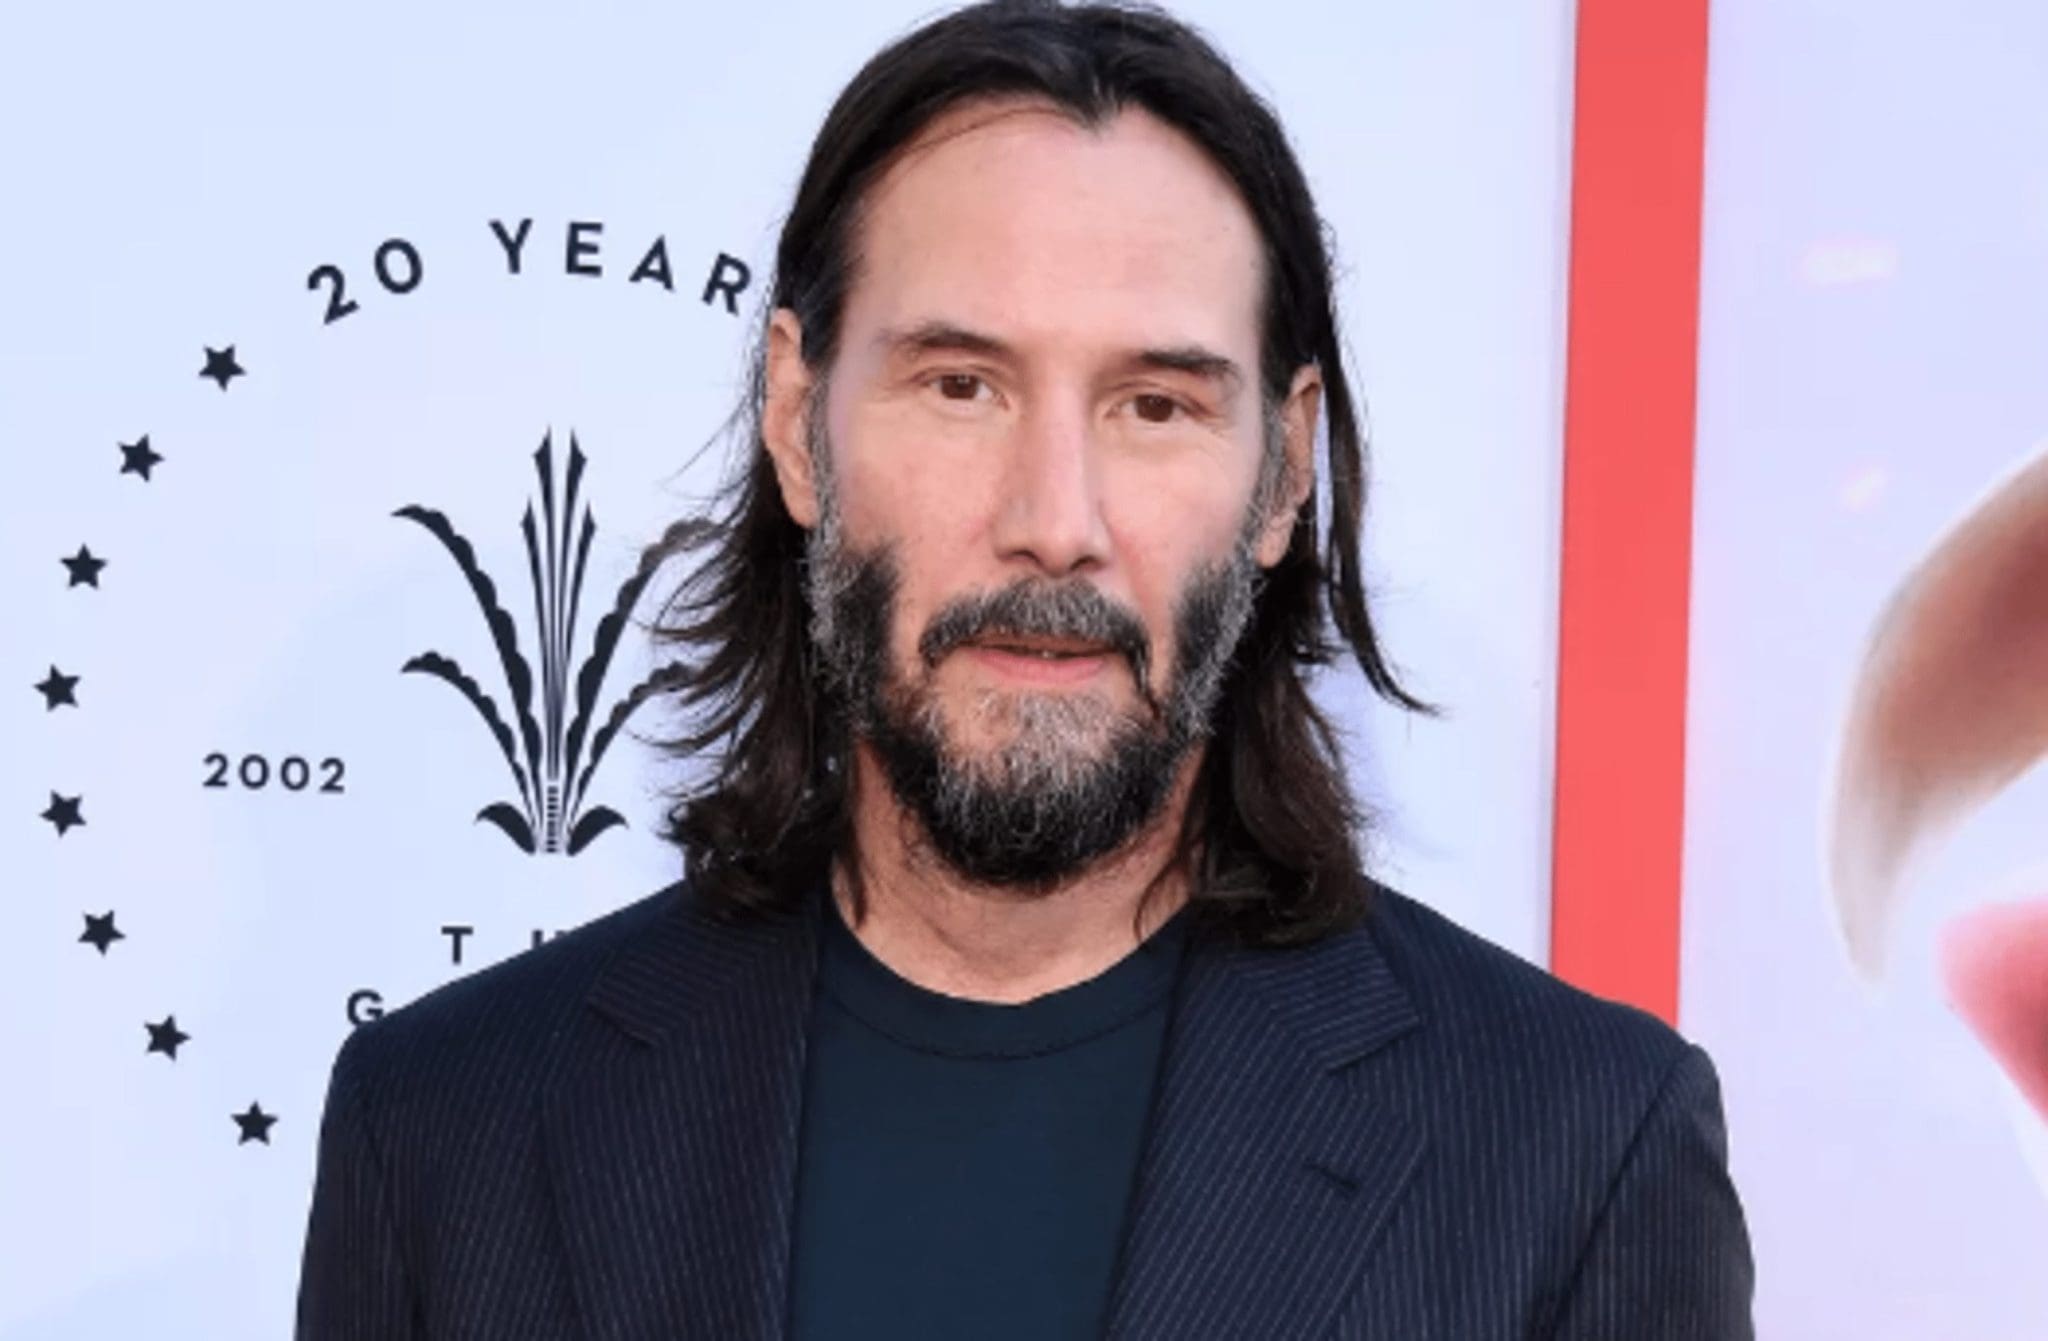 Exit Keanu Reeves 'Devil In The White City,' A Hulu Miniseries Directed By Martin Scorsese And Starring Leonardo DiCaprio